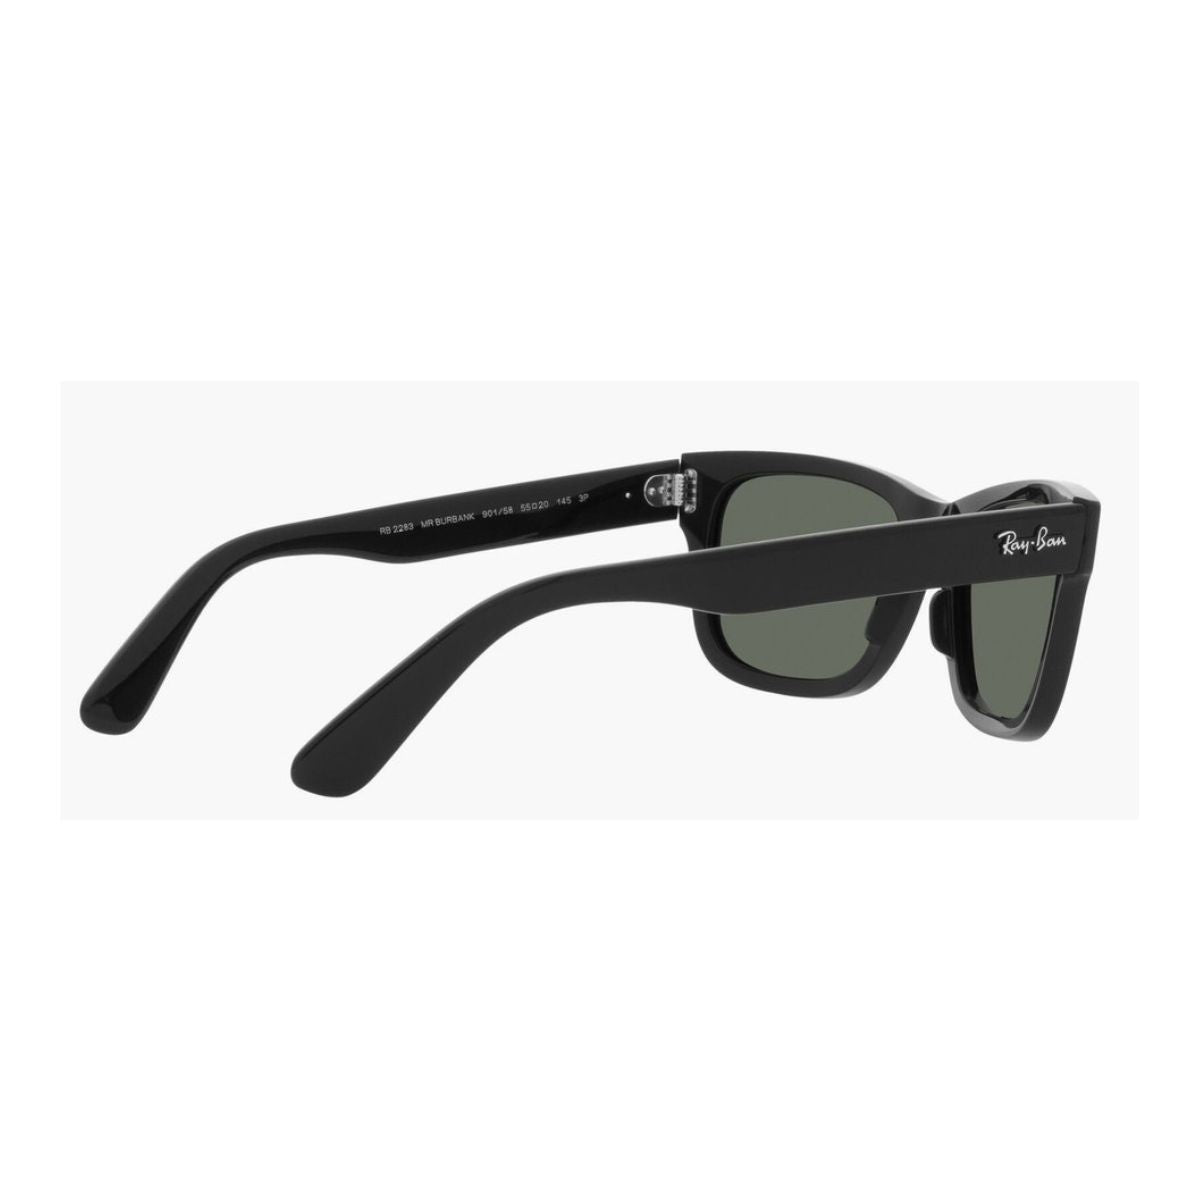 " Rayban 2283 901/58 Sunglasses for Men's UV Safety Online At Optorium"